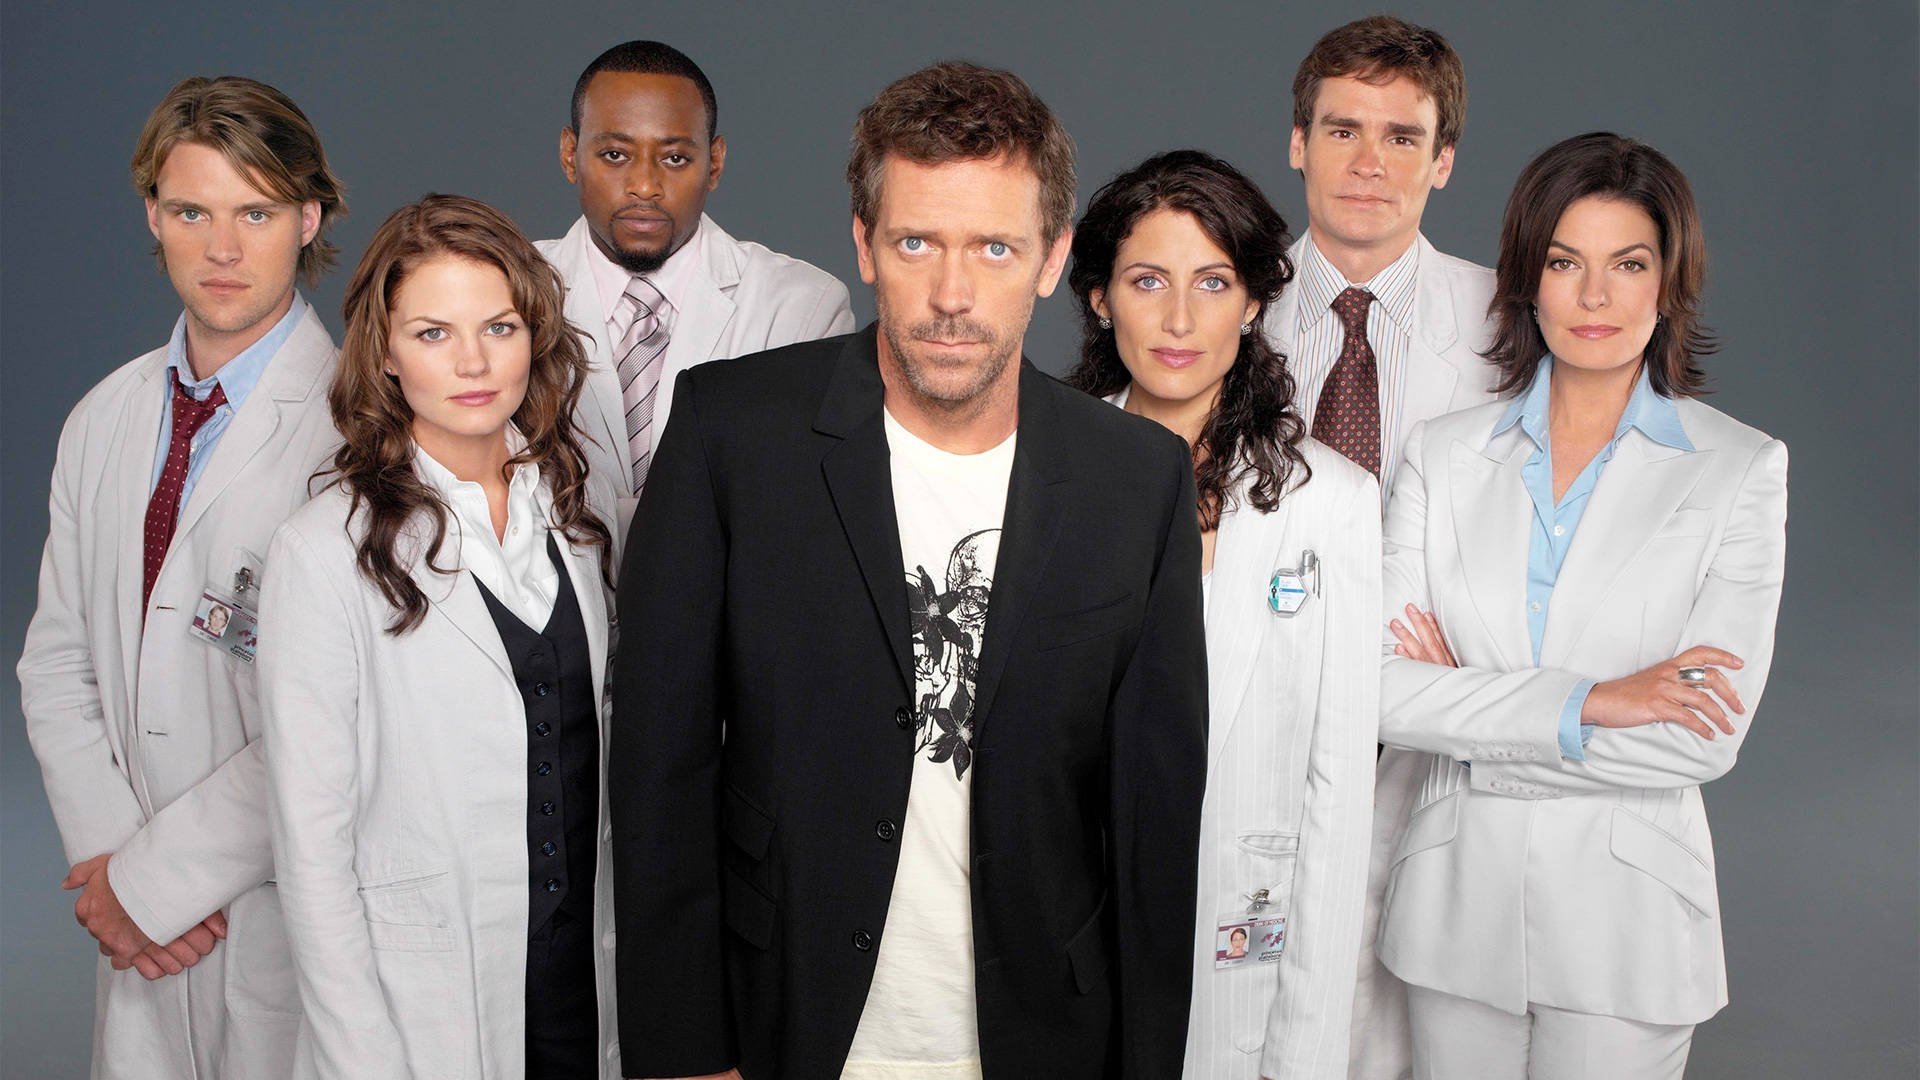 House Md Doctors In White Coats Wallpaper